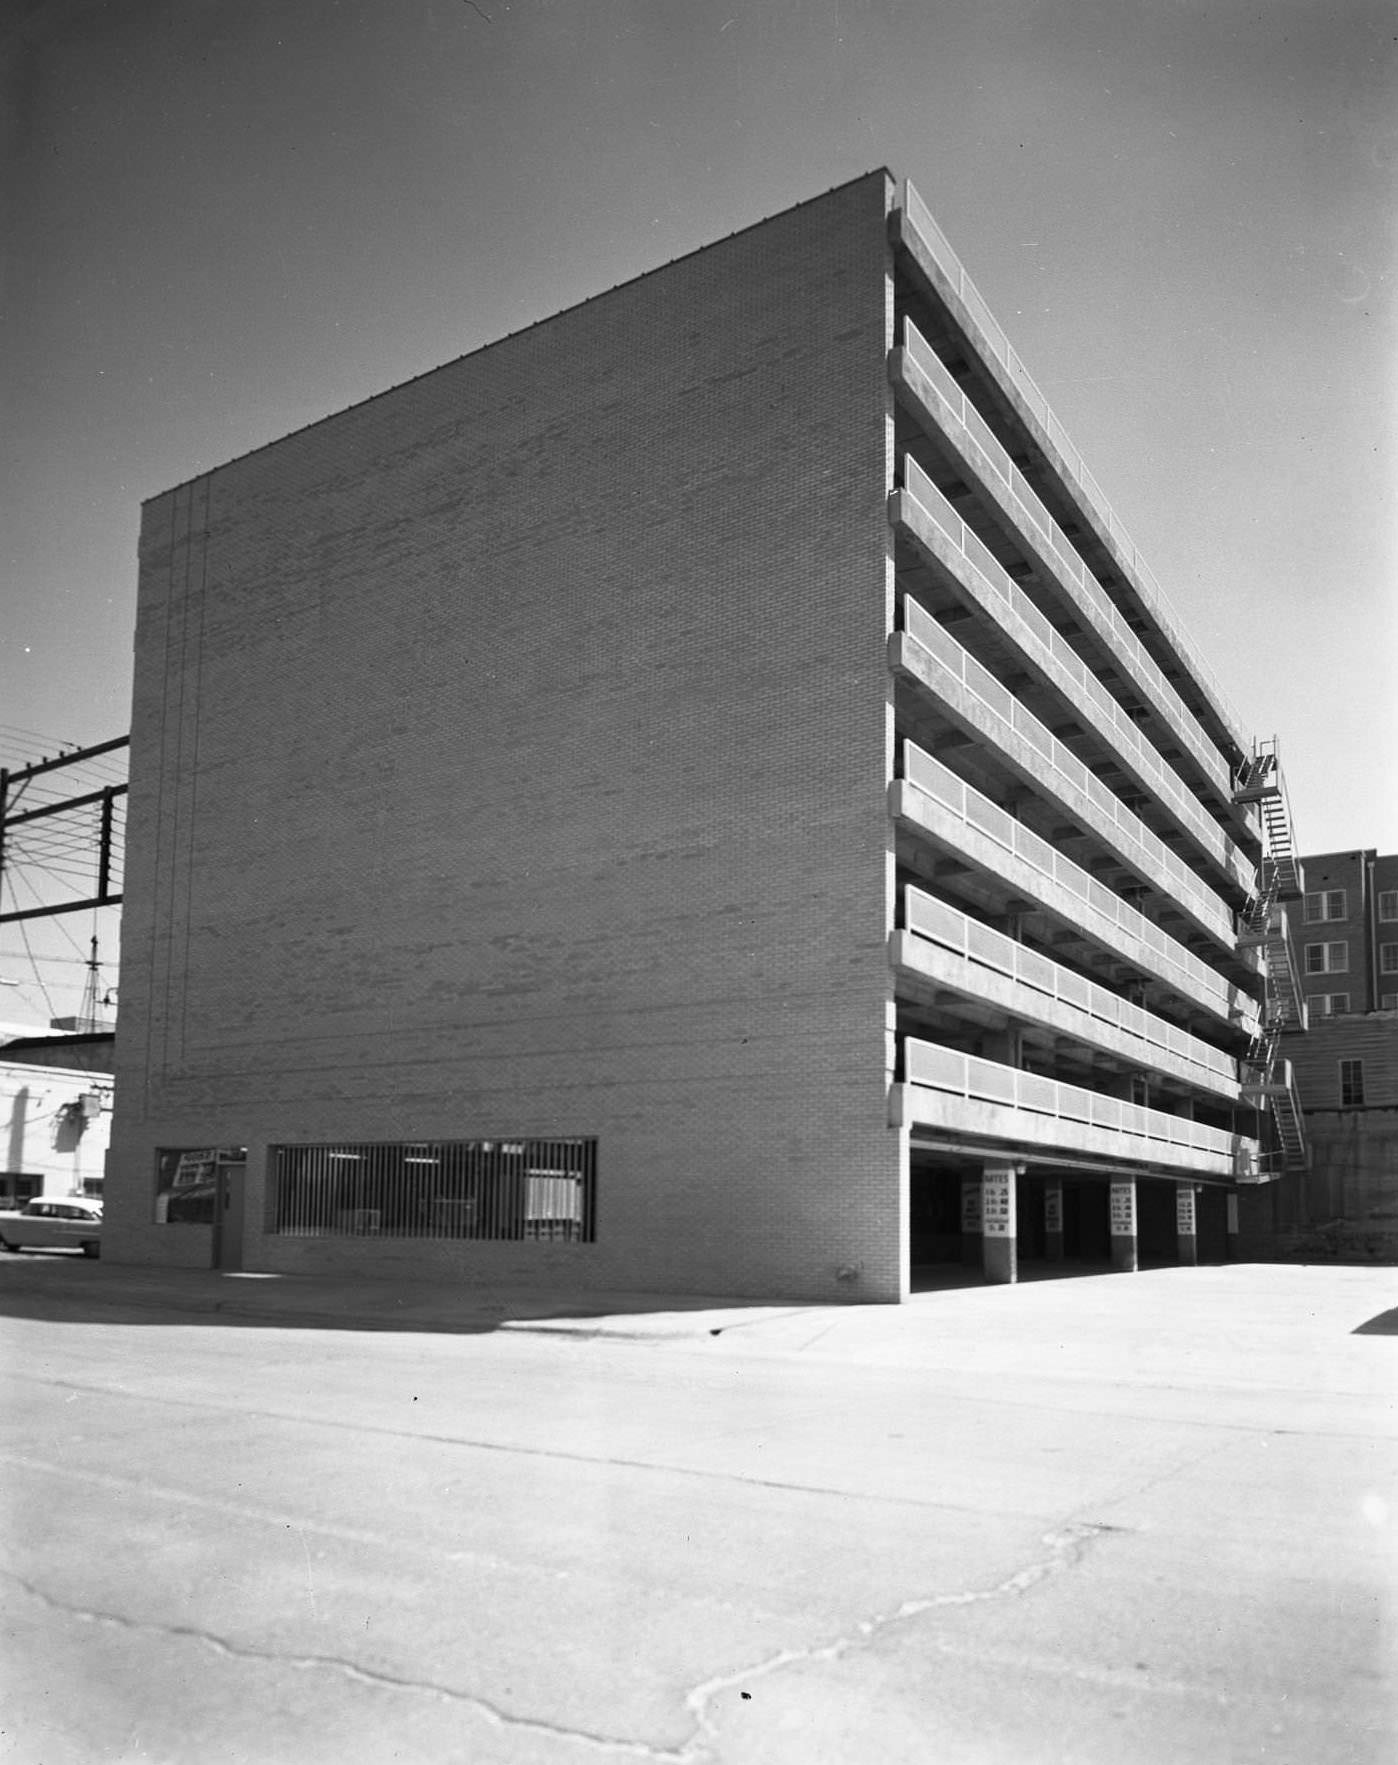 Parking garage at F and M Bank, 1955. The building has seven above ground levels. There are buildings, a car, and power lines behind it.